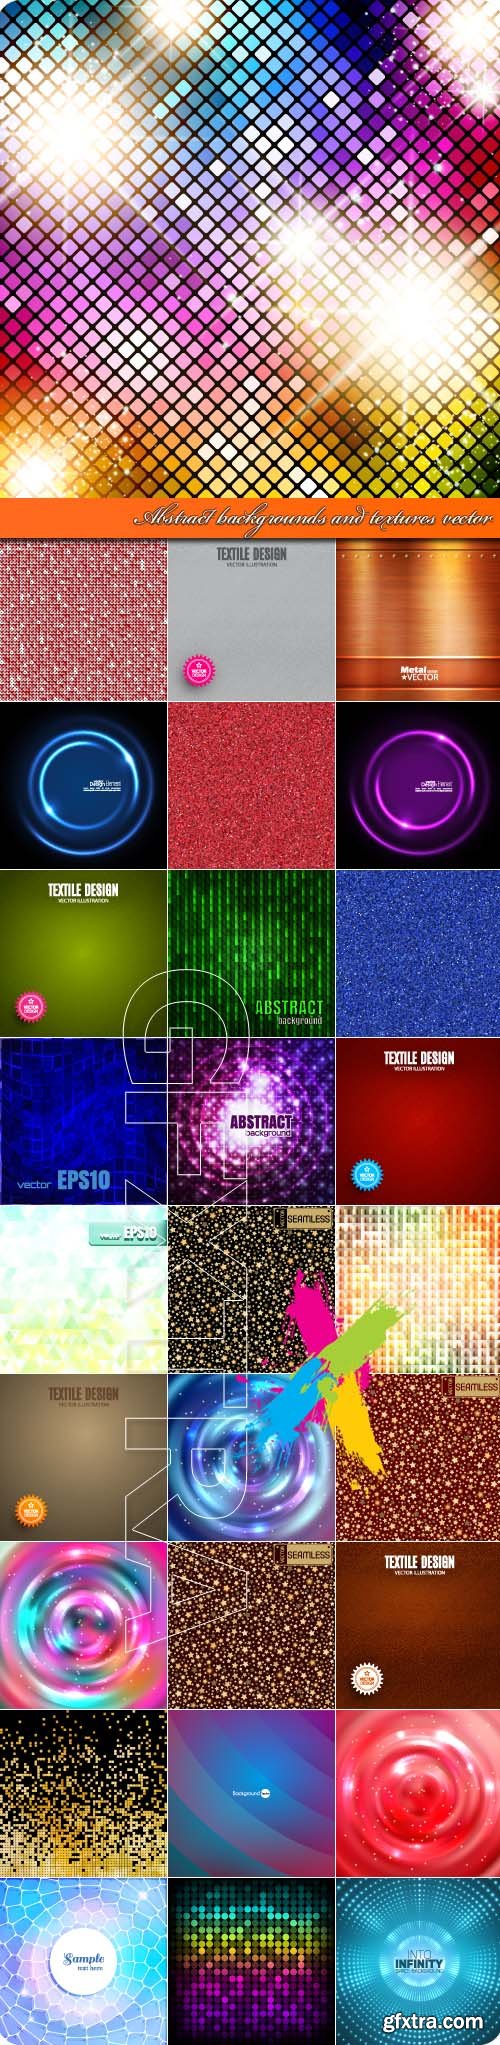 Abstract backgrounds and textures vector